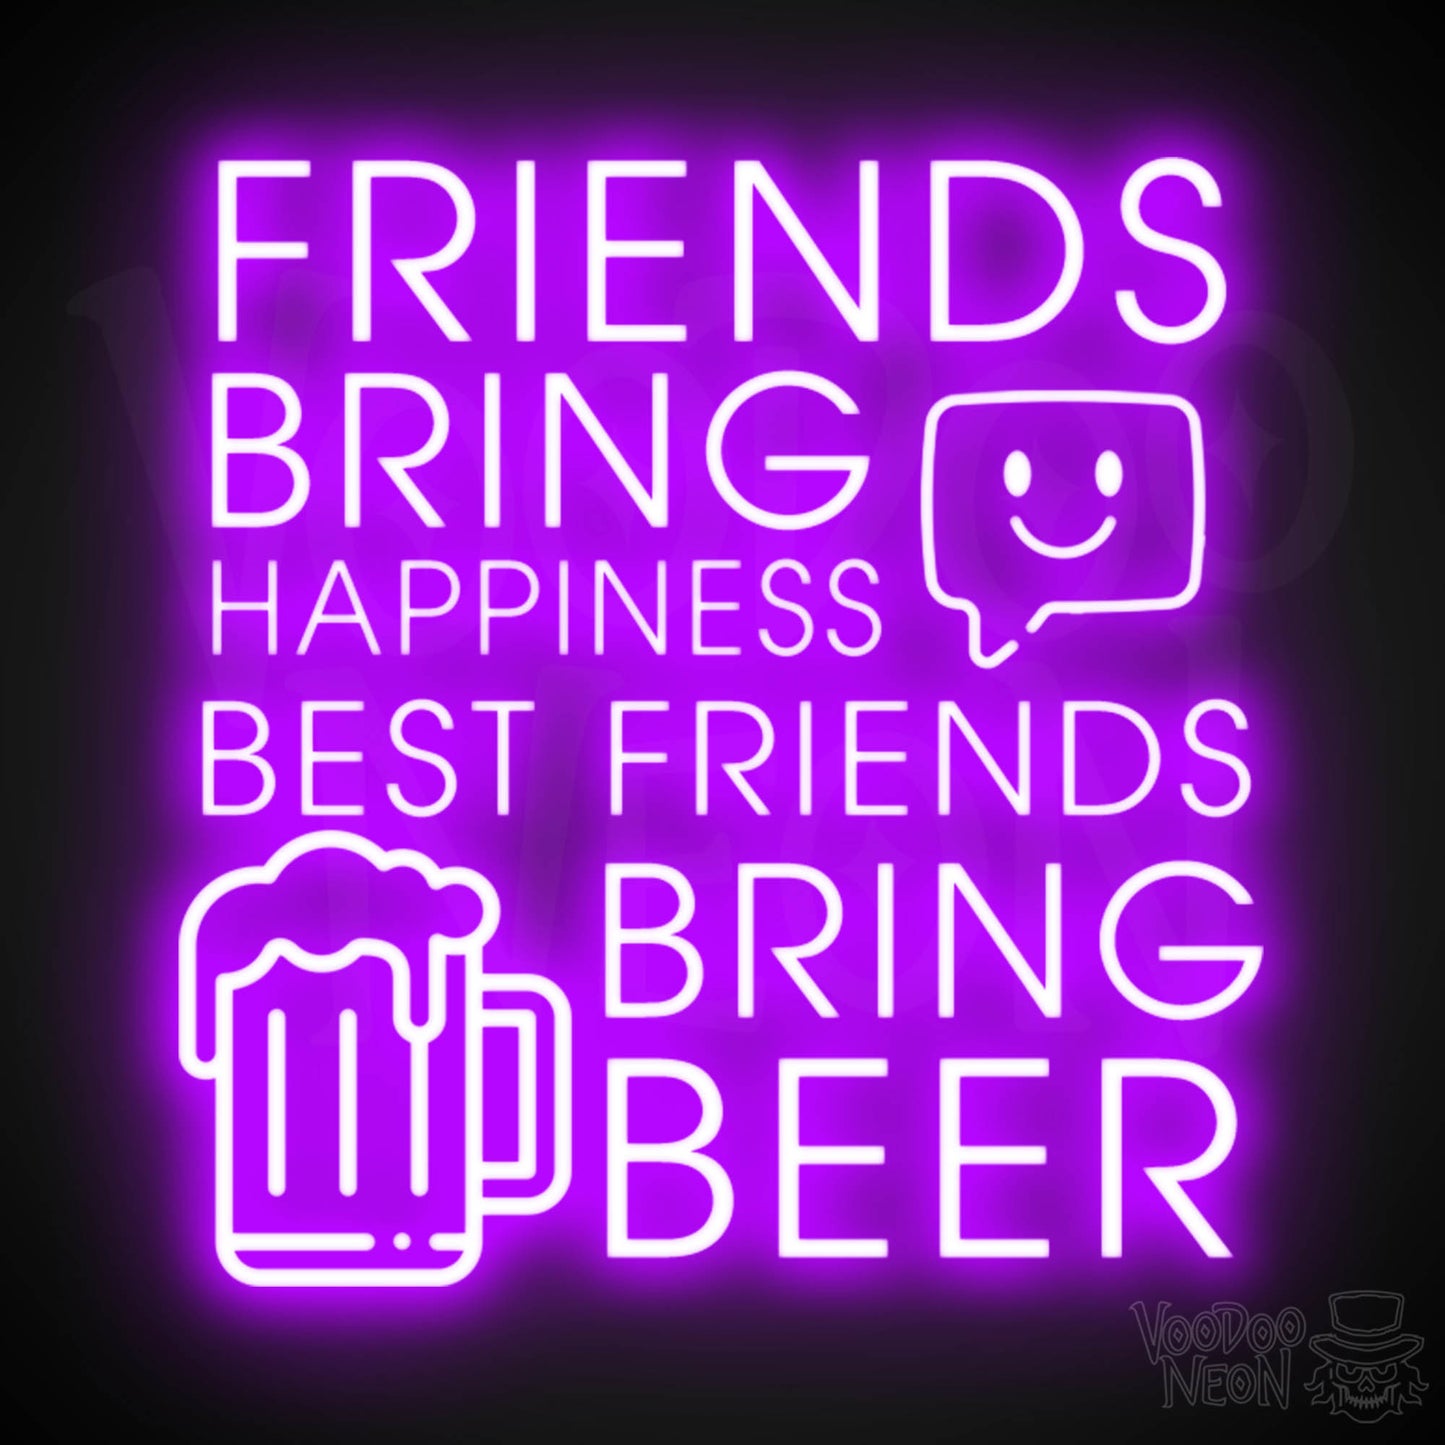 Friends Bring Happiness Best Friends Bring Beer Neon Sign - LED Lights Wall Art - Color Purple